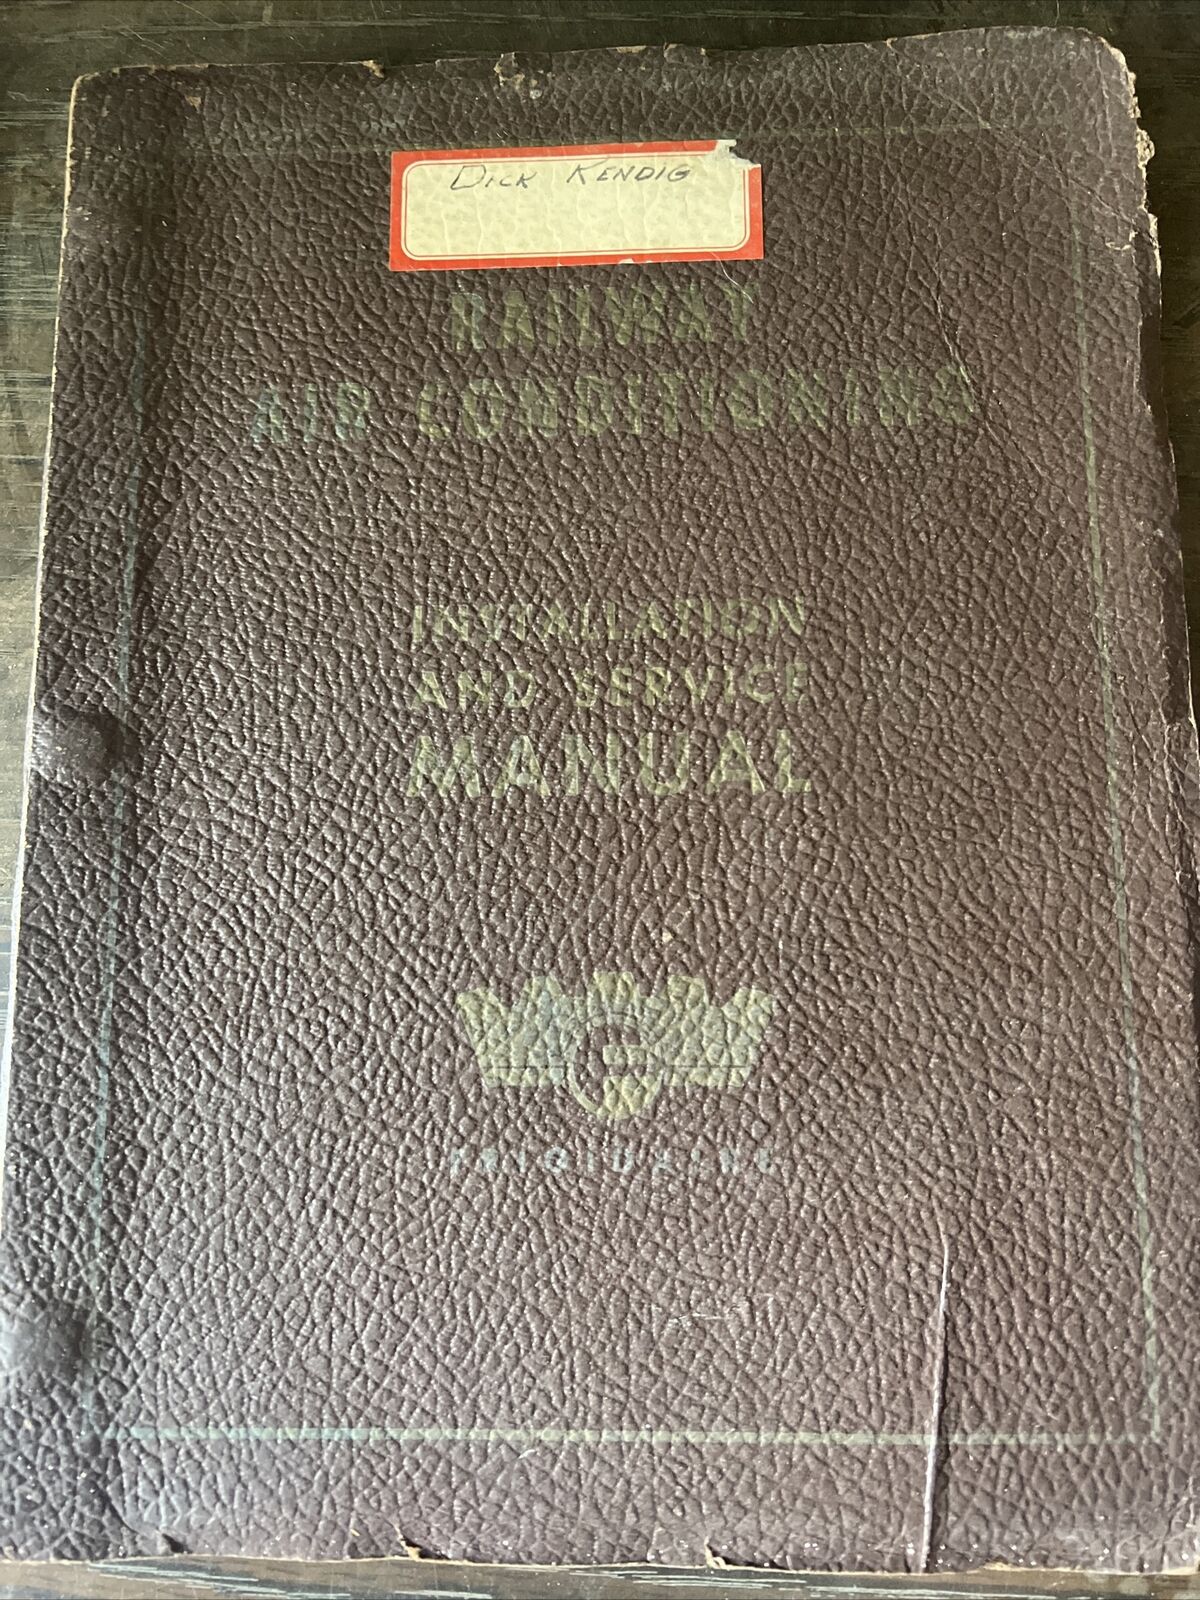 1949 FRIGIDAIRE RAILWAY AIR CONDITIONING INSTALLATION AND SERVICE MANUAL